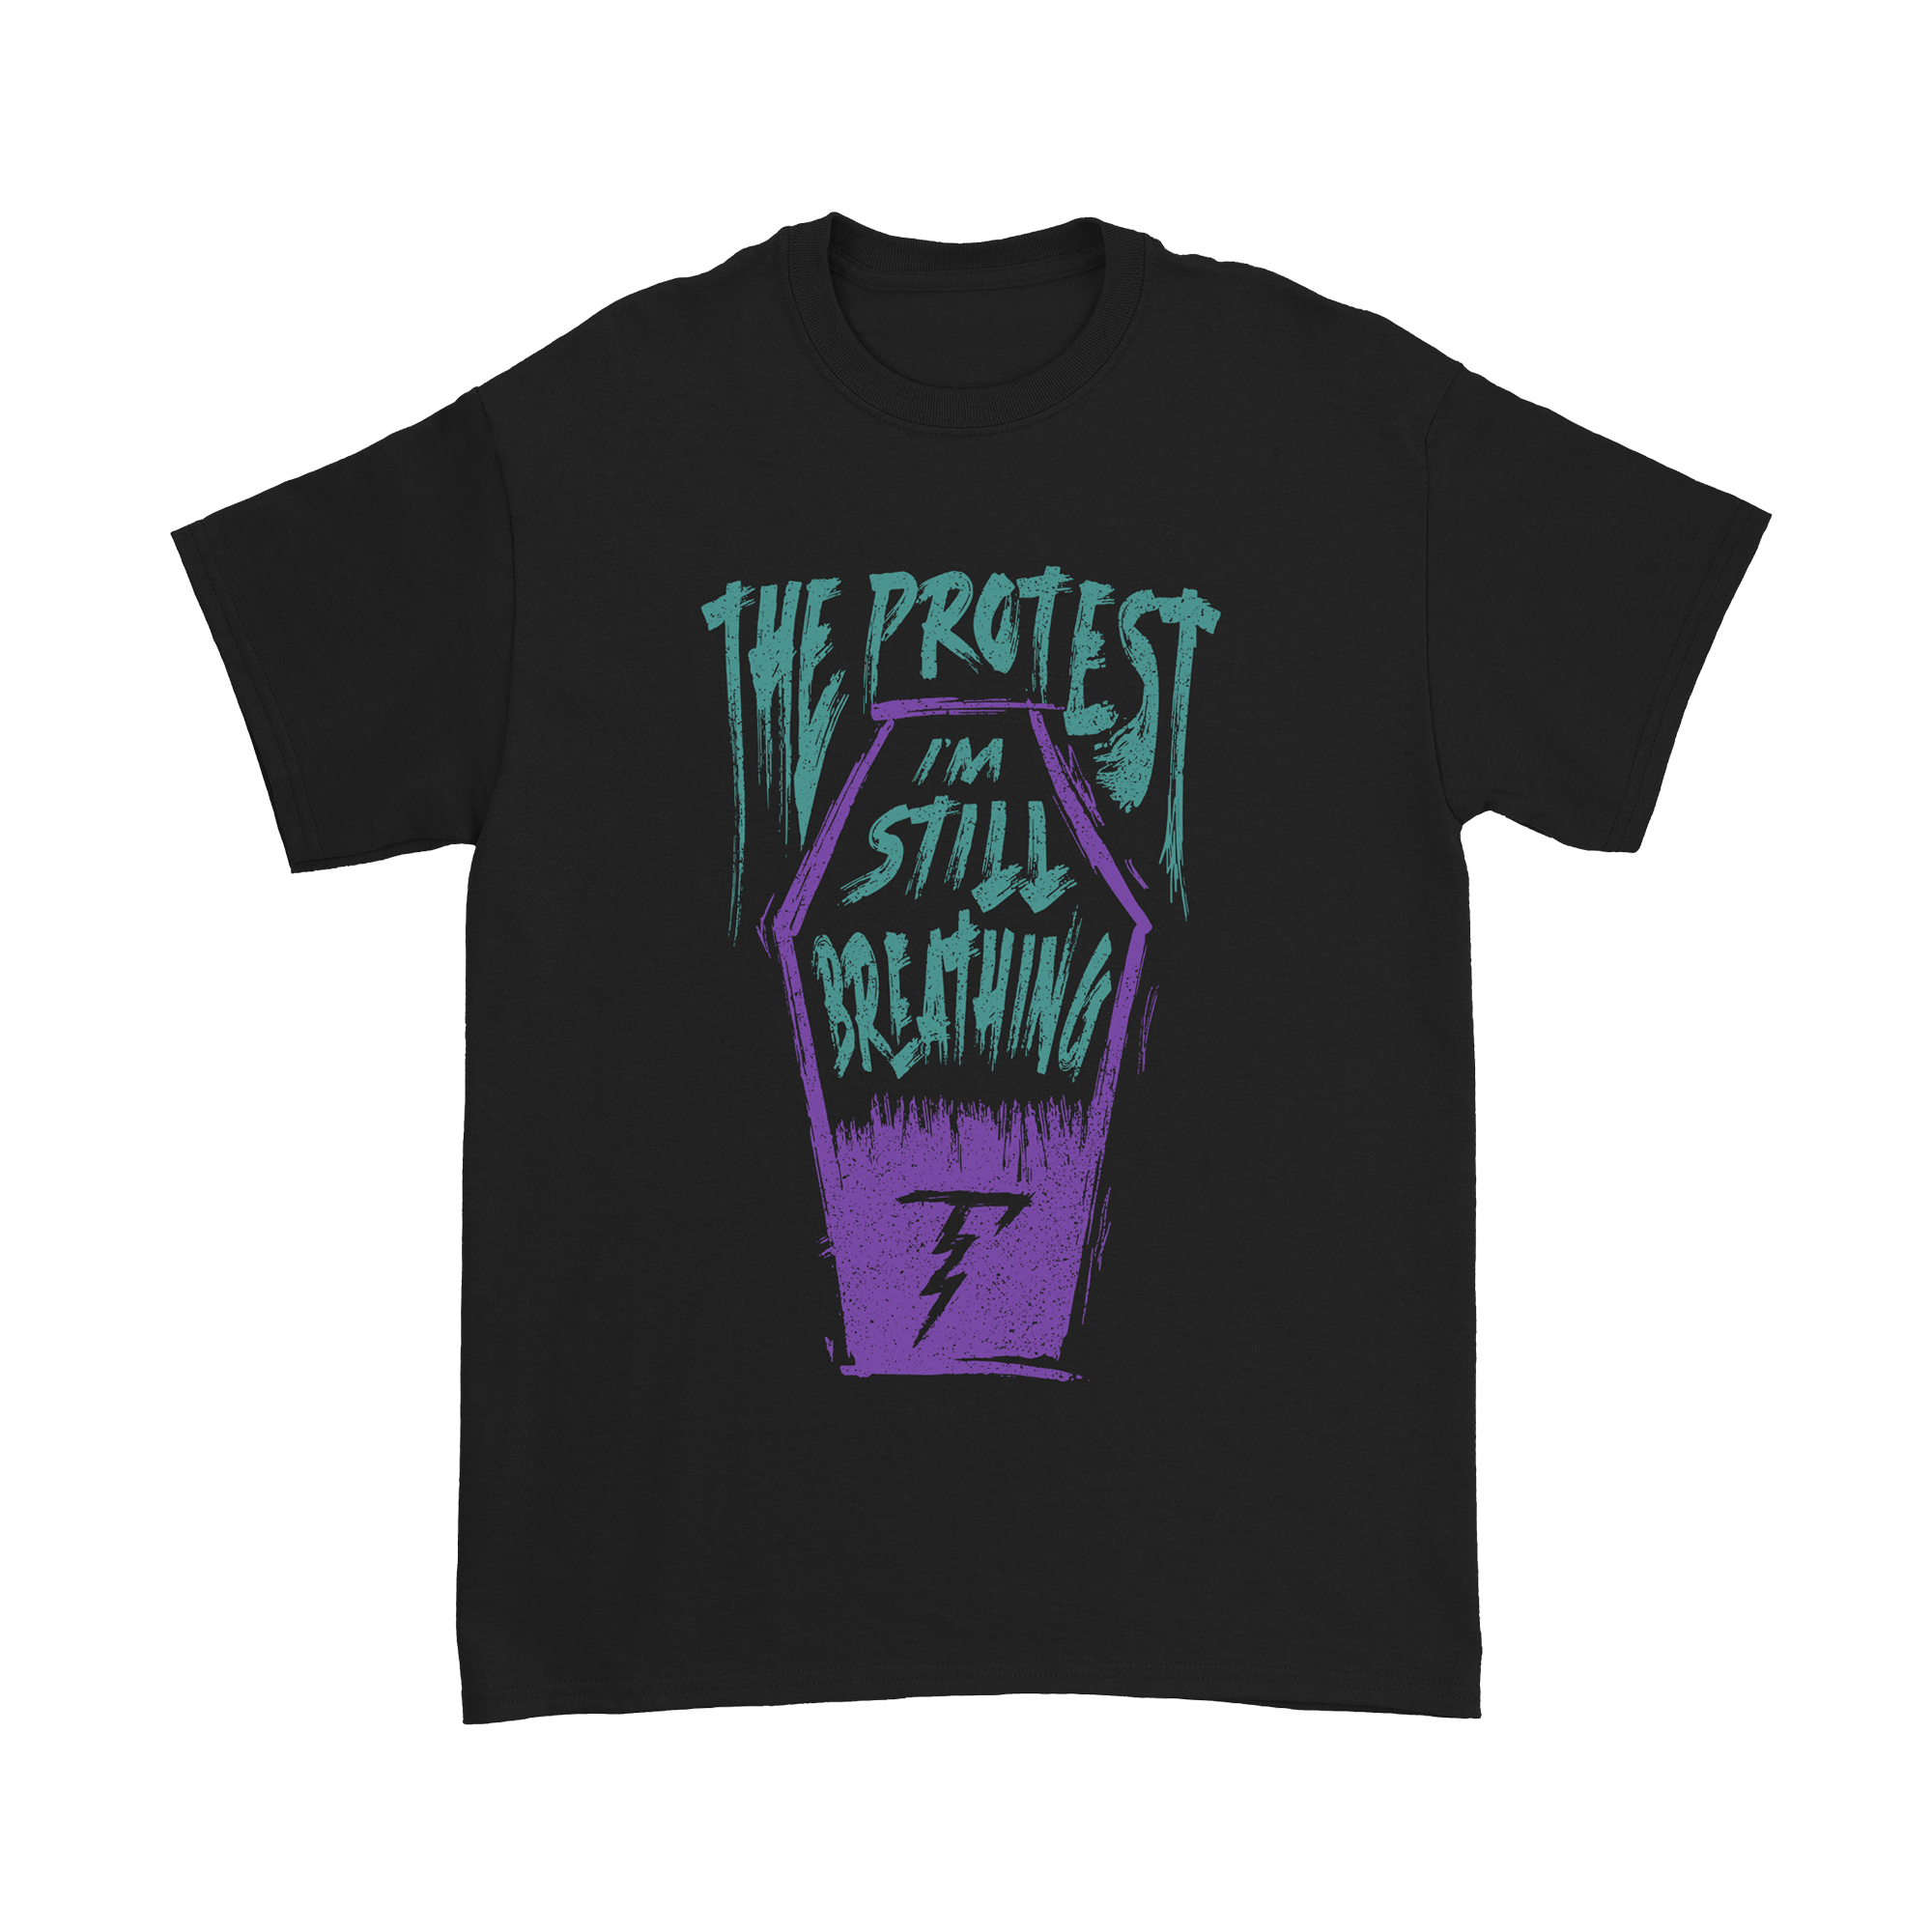 The Protest - Still Breathing T-Shirt